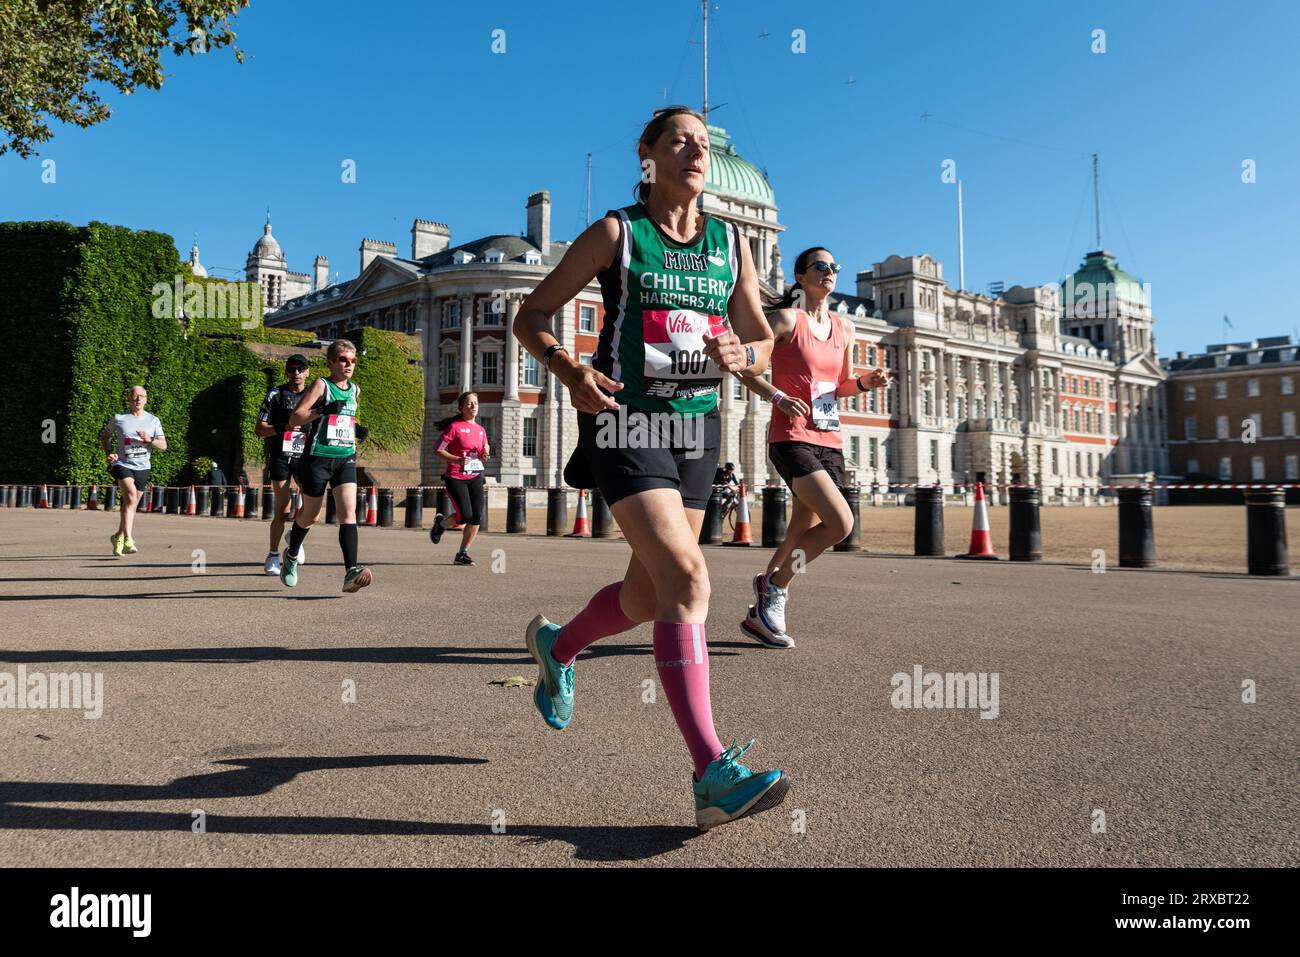 Vitality Westminster Mile Runners Passing Horse Guards Parade, Westminster, Londra, Regno Unito. Runner femminile Foto Stock